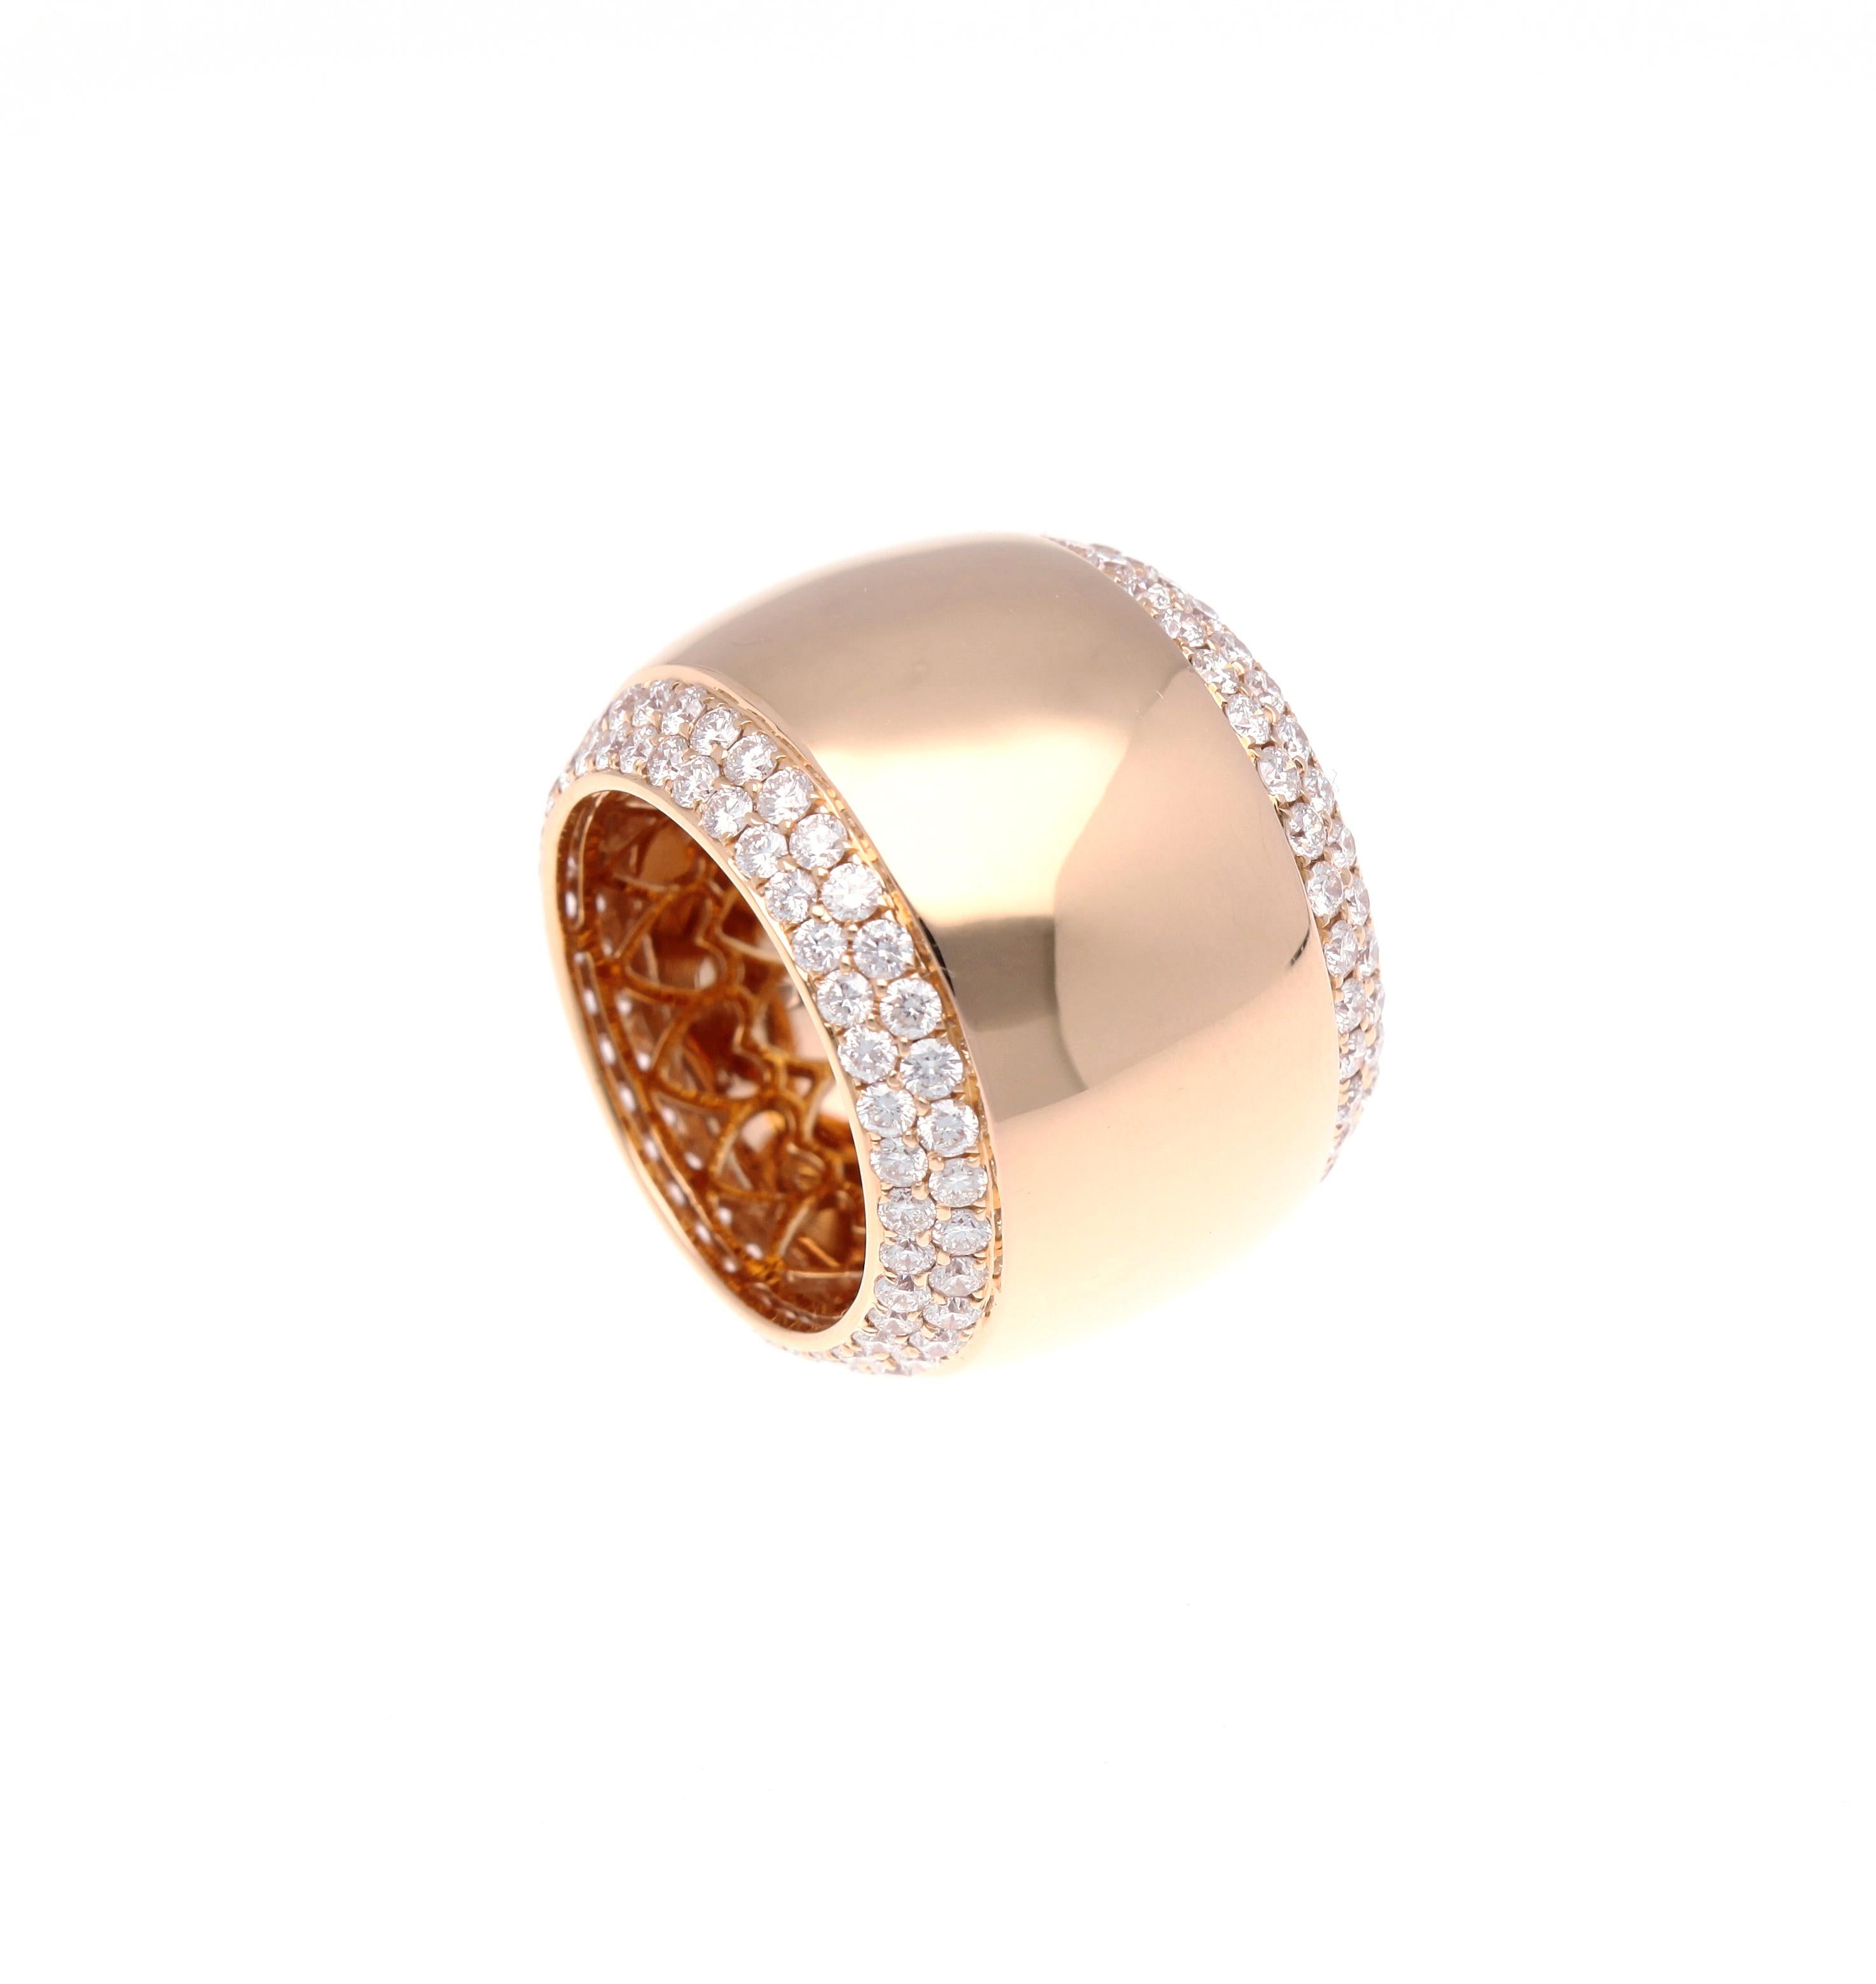 Modern 18 Karat Rose Gold Band Ring with Diamonds Total Weight 3.39 Carat For Sale